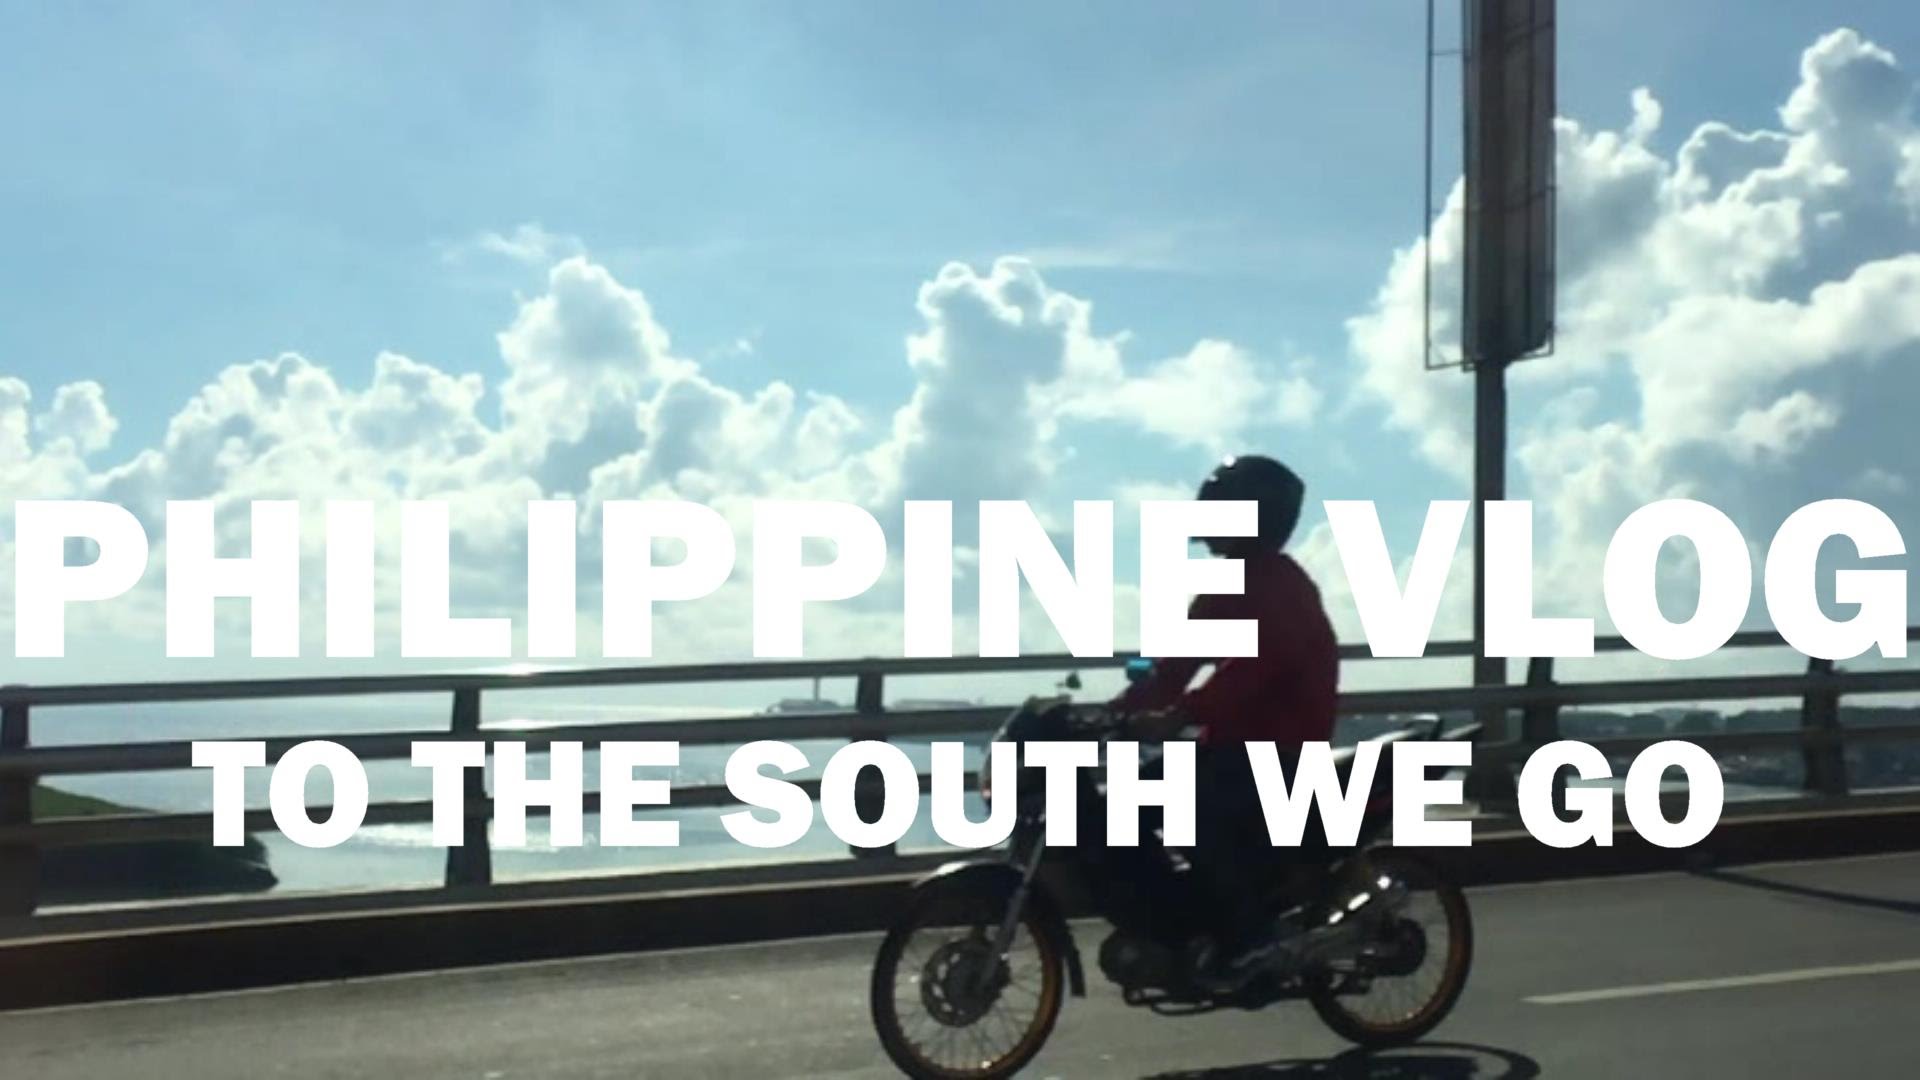 2016 PHILIPPINE VLOG - To the South We Go! (2/5) - YouTube